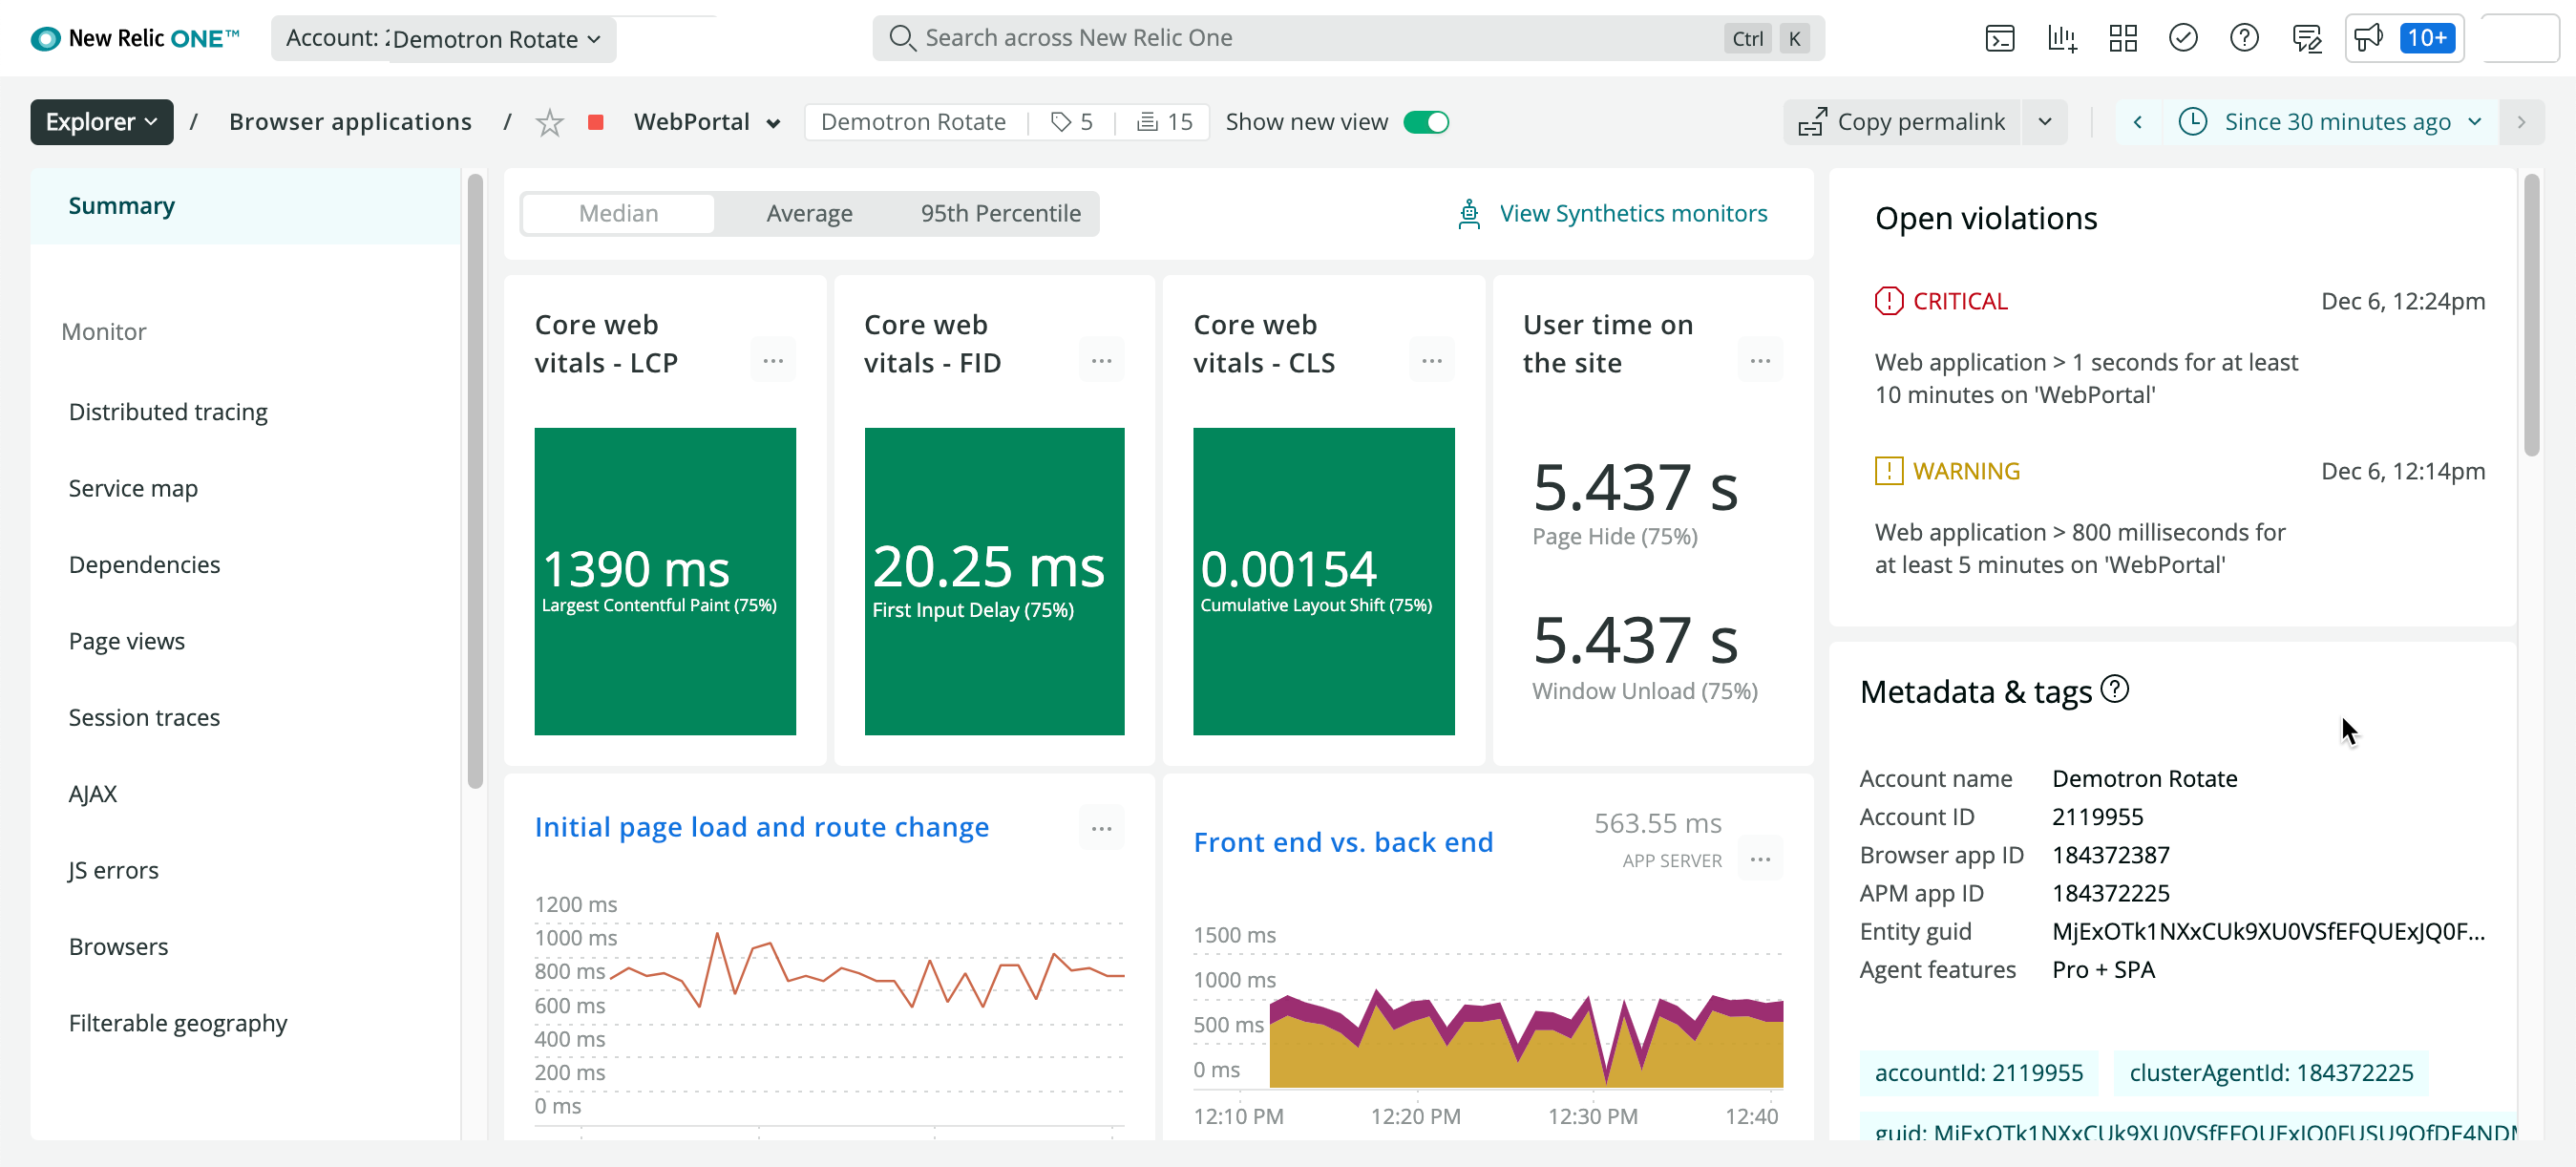 Screenshot of the New Relic browser monitoring Summary page